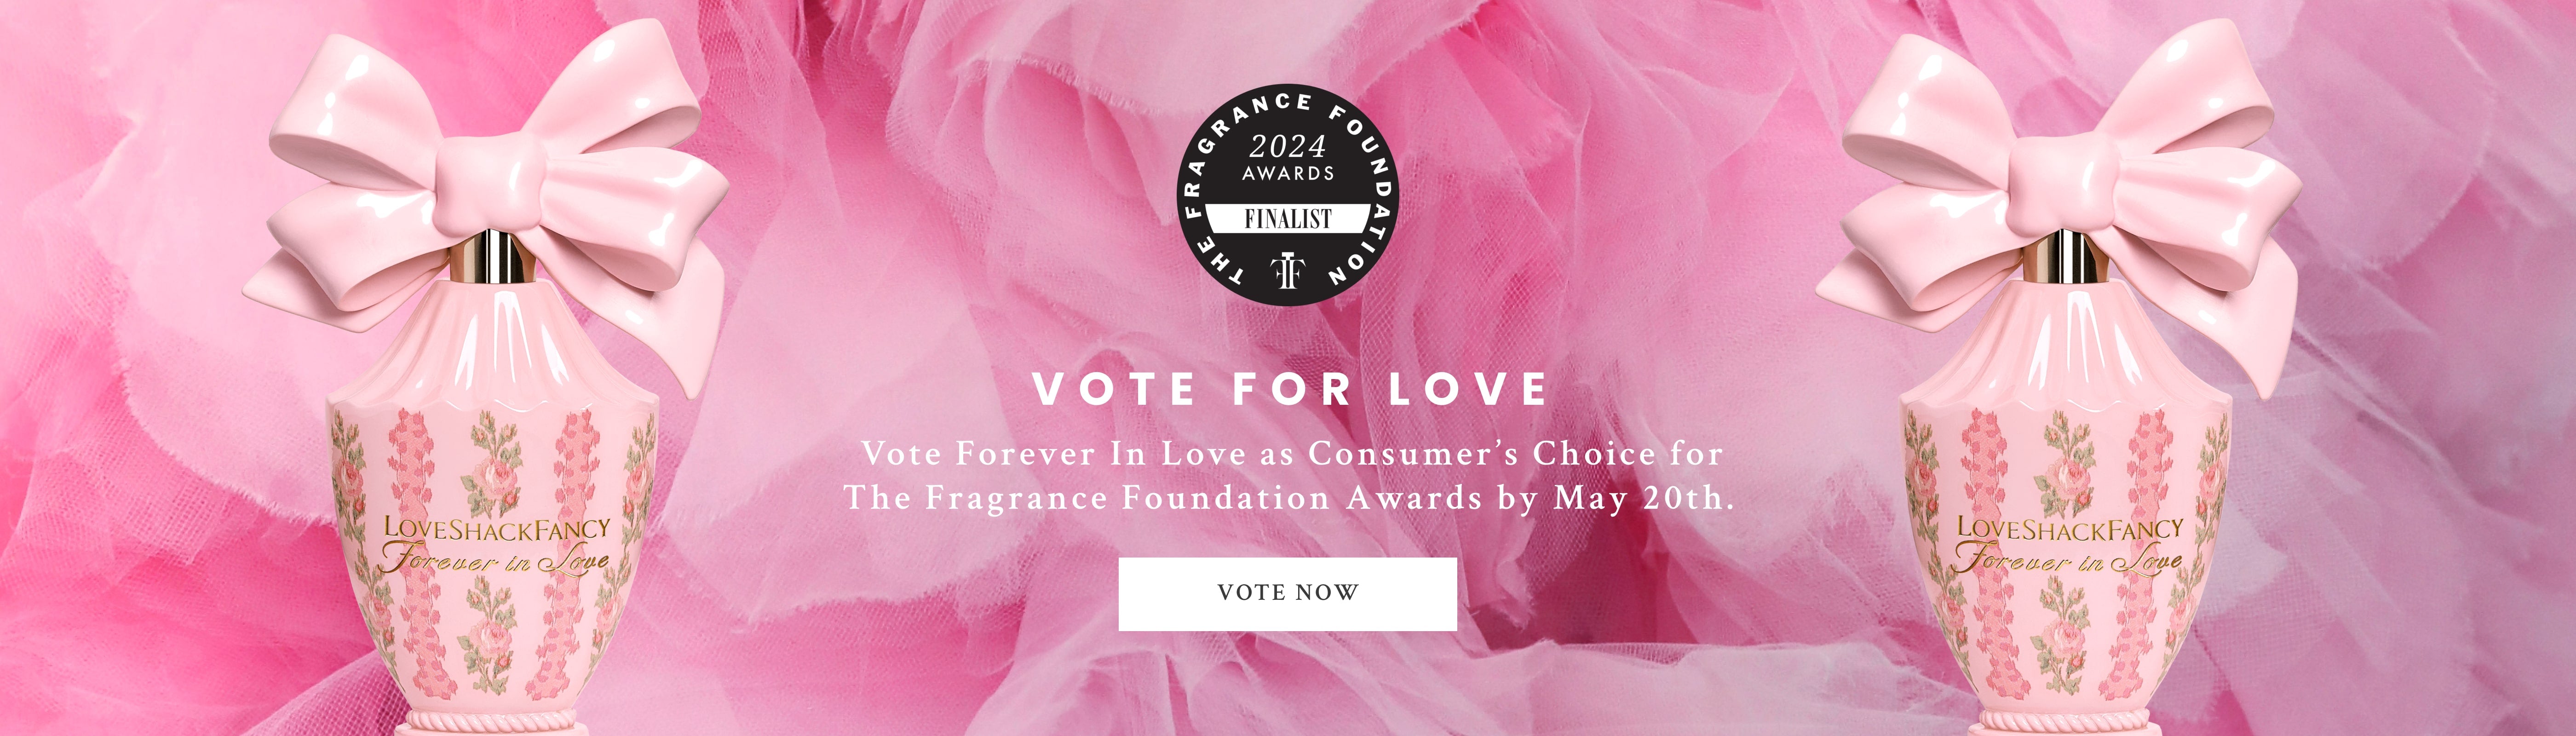 Vote for Forever In Love as Consumer's Choice for The Fragrance Foundation Awards by May 20th.